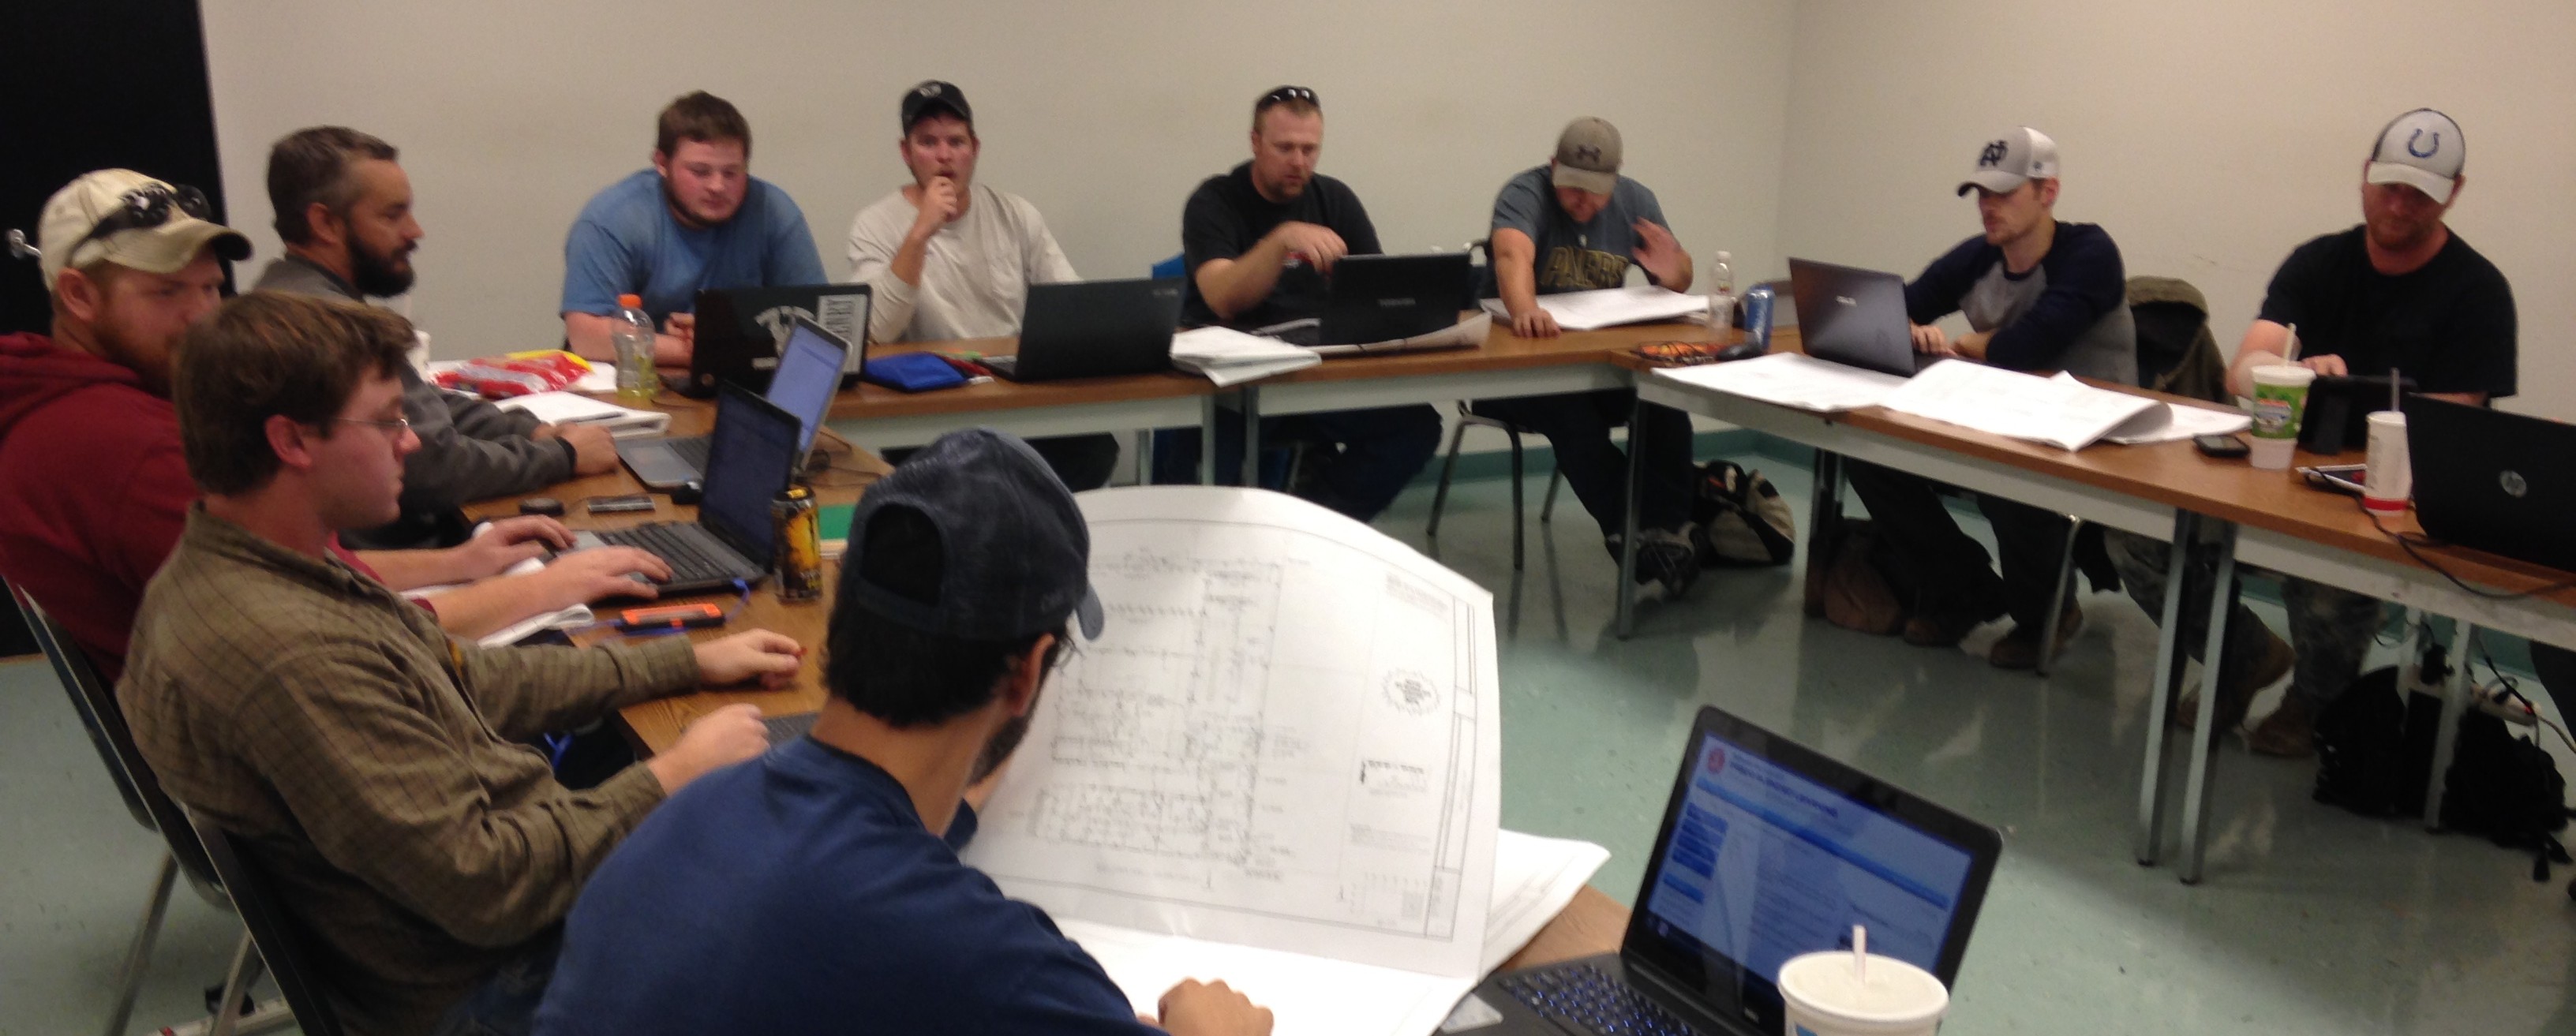 Students in the classroom at the NECA/IBEW Electrical JATC in Evansville, IN.